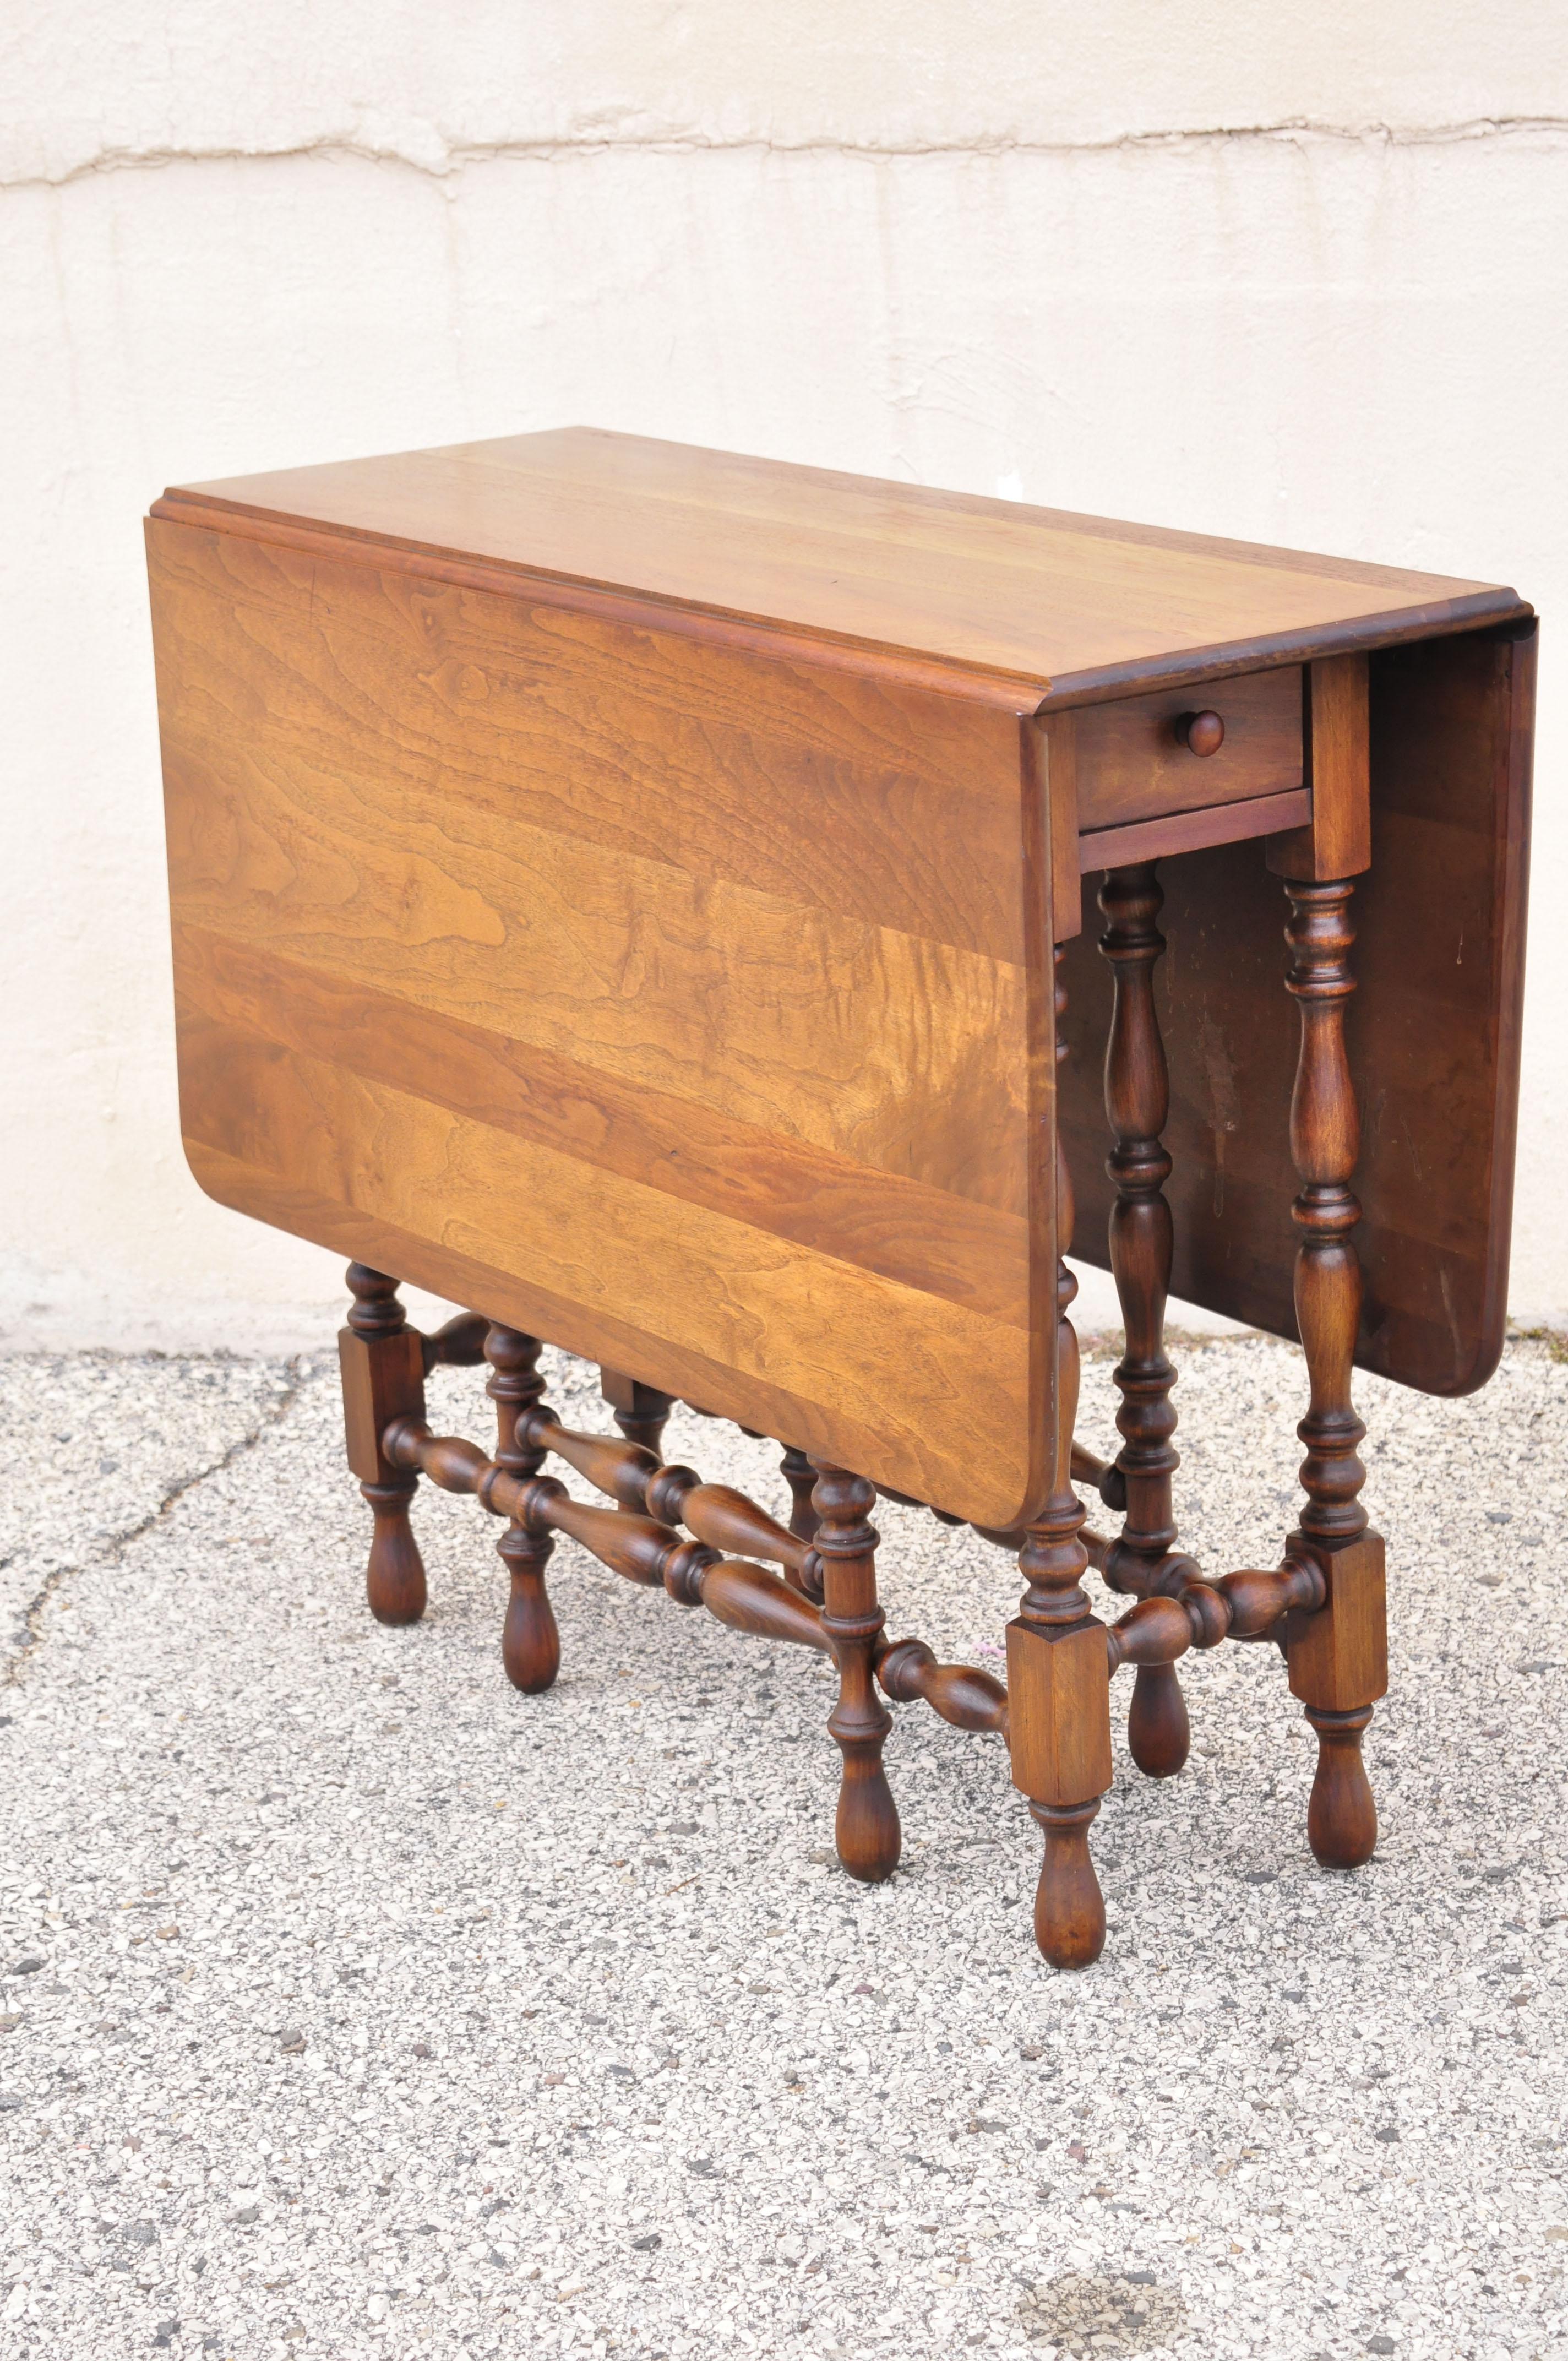 Antique Jacobean walnut drop leaf gate leg dining table with drawer by Brandt. Item features drop leaf sides with gate leg base, solid wood construction, beautiful wood grain, original label, 1 drawer, very nice antique item, quality American